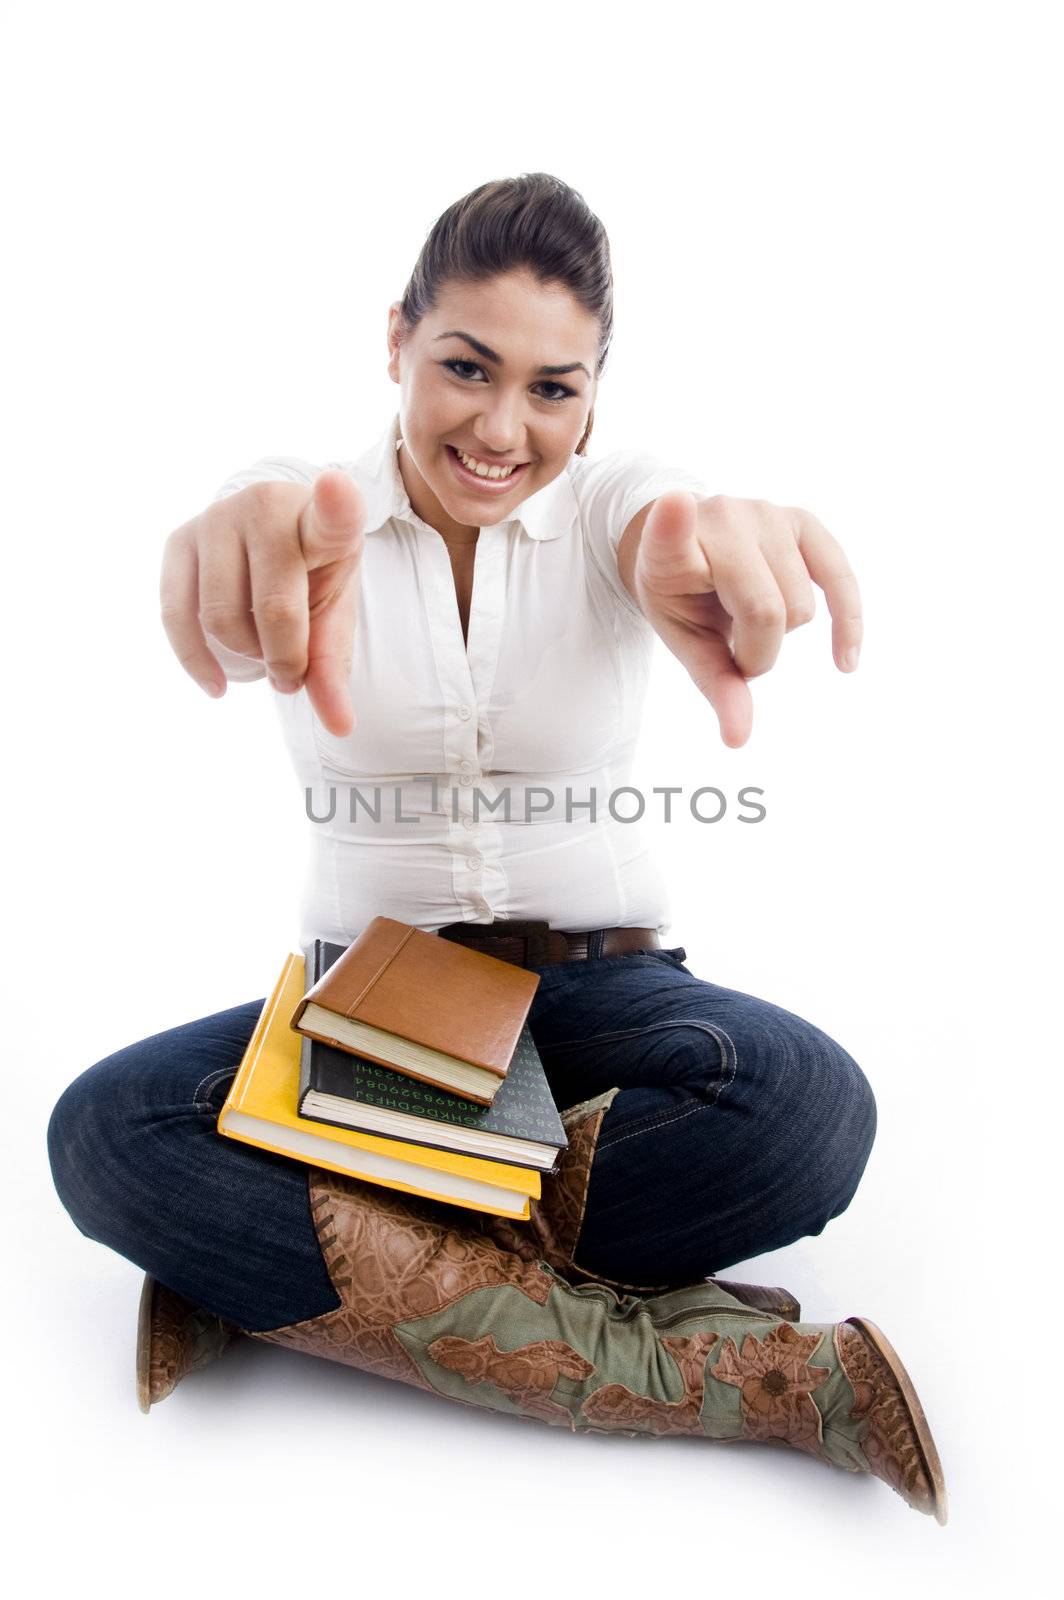 pointing smiling female with books by imagerymajestic